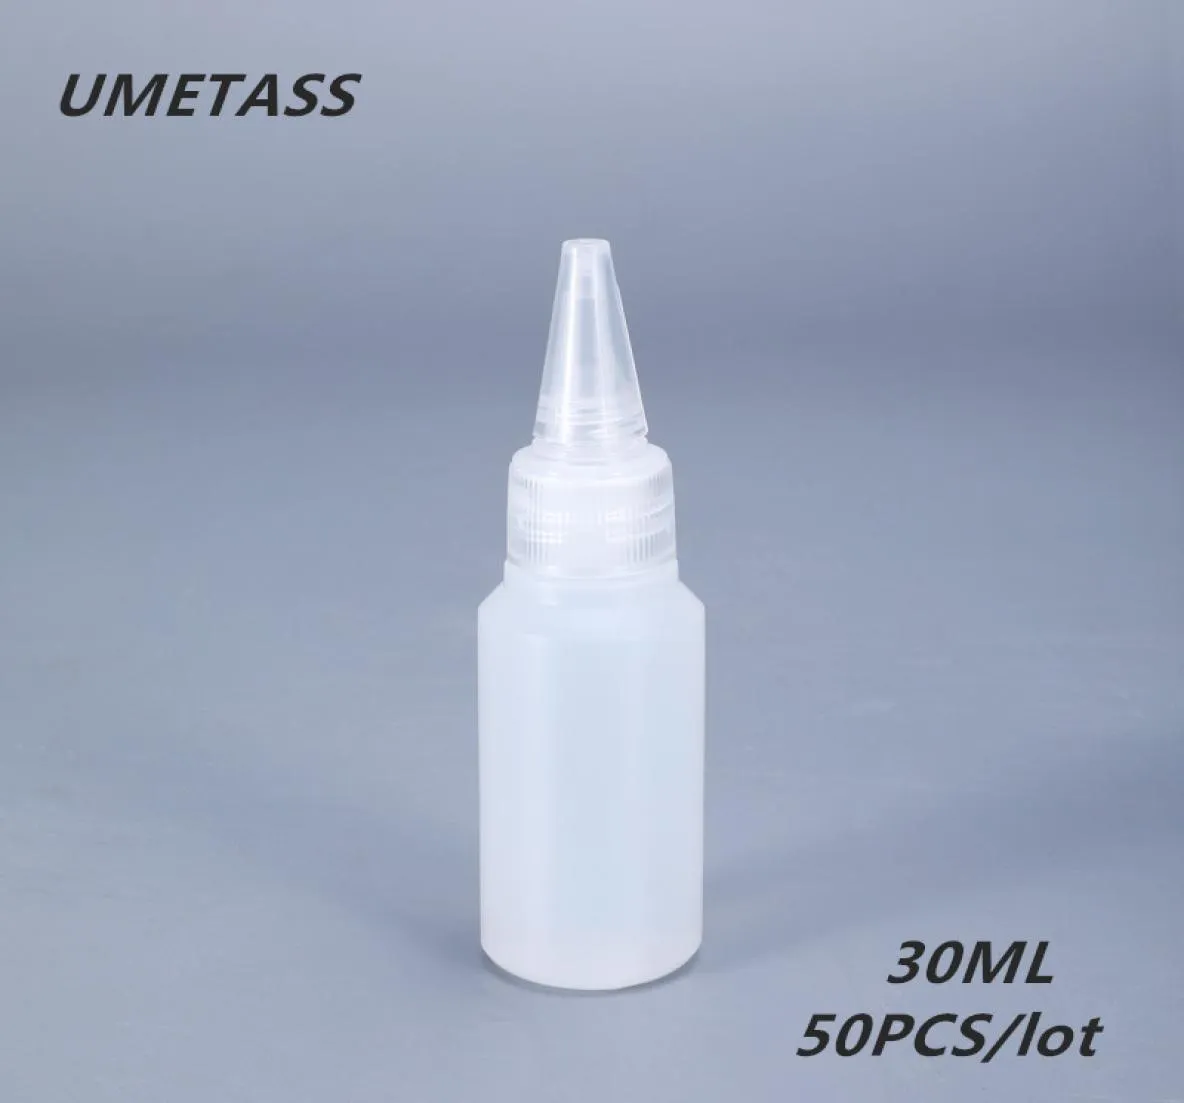 Storage Bottles Jars UMETASS 30ML Small Squeeze PE Plastic For Glue Oil Round Dropper Bottle Leakproof Liquid Container 50PCSlo9300886